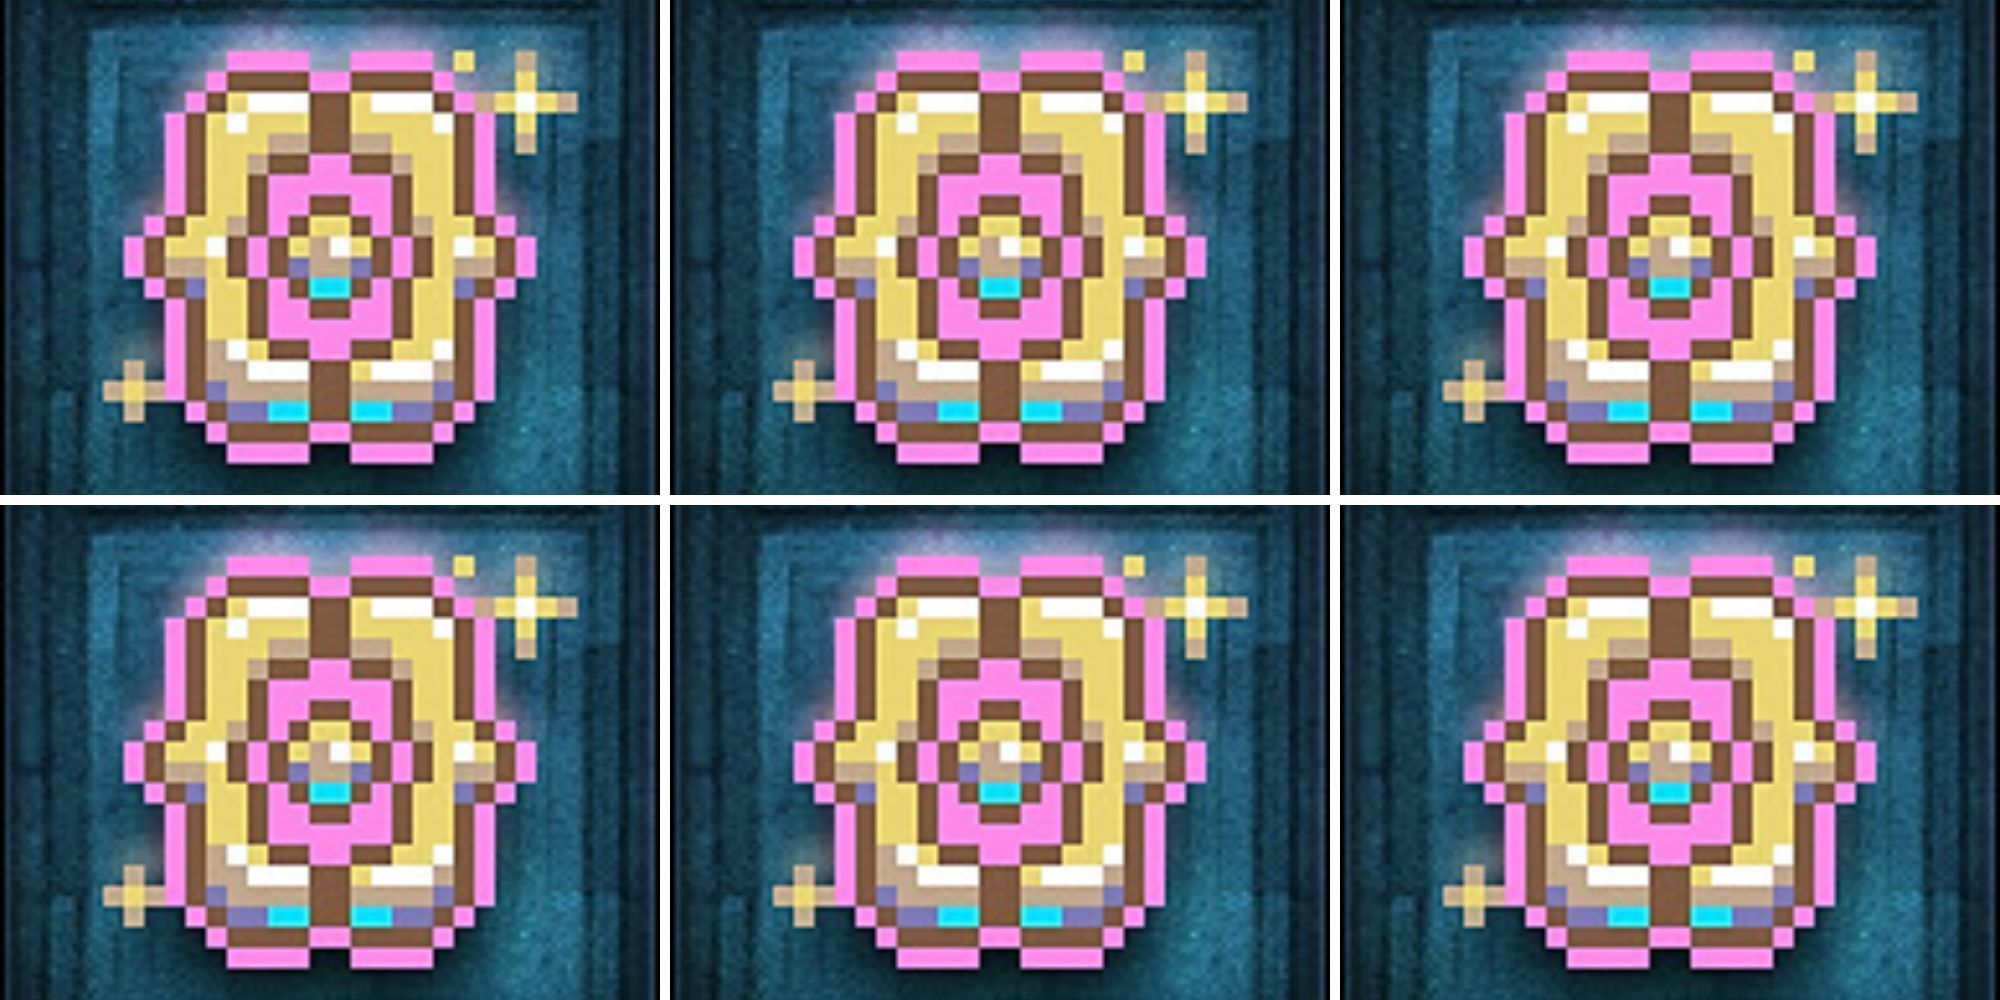 Repeating the yellow and pink pattern of the Pebcakes achievement icon.